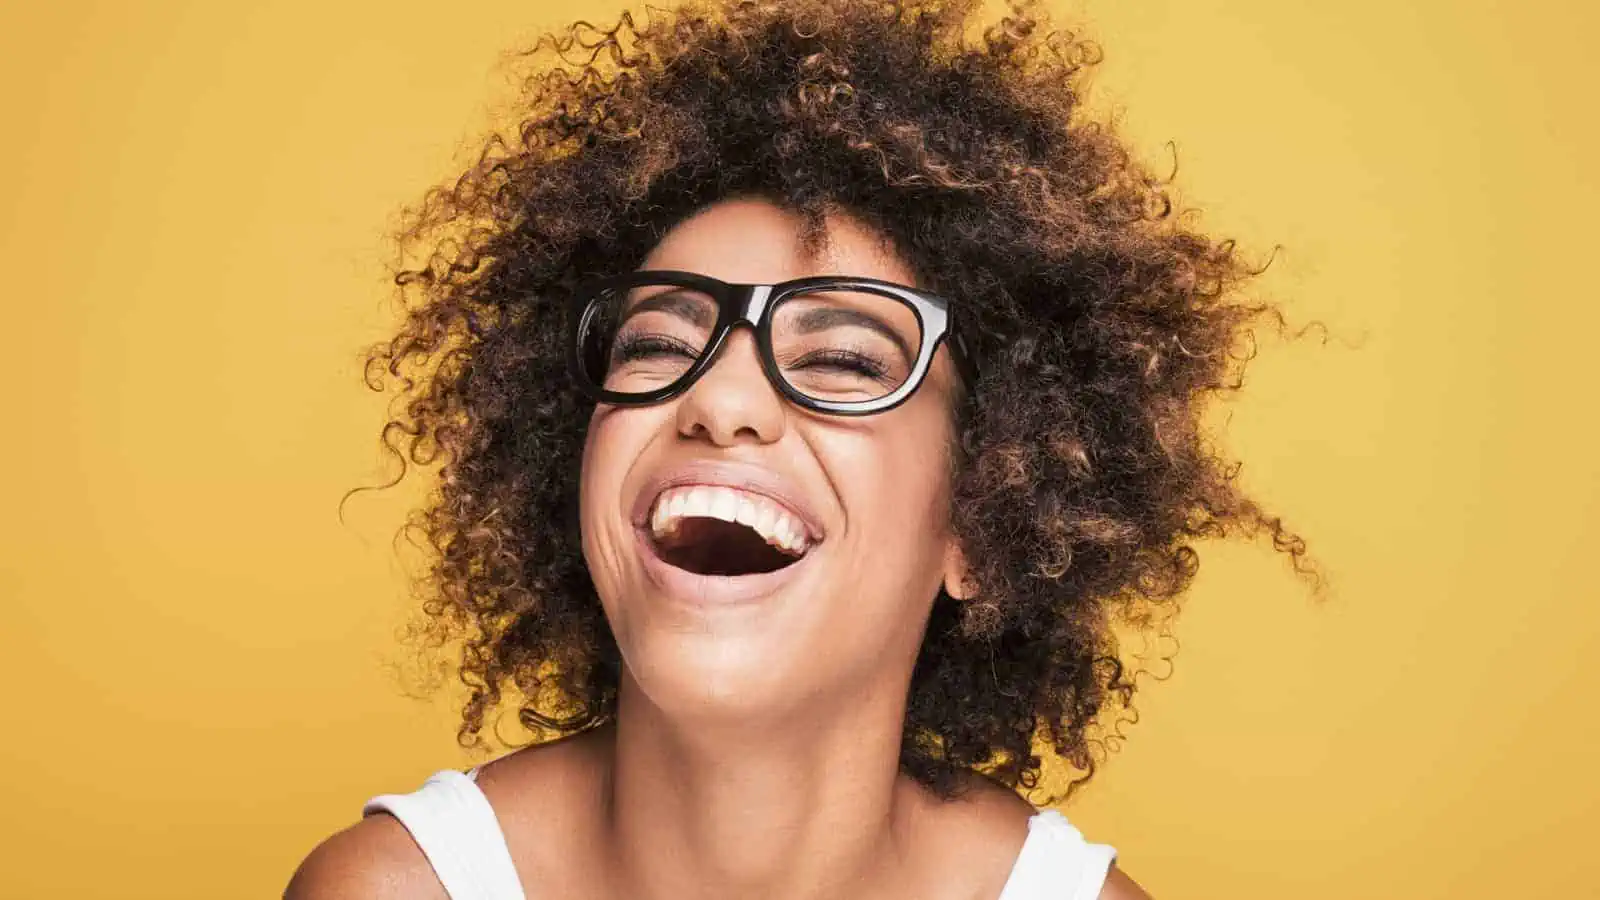 woman in glasses laughing